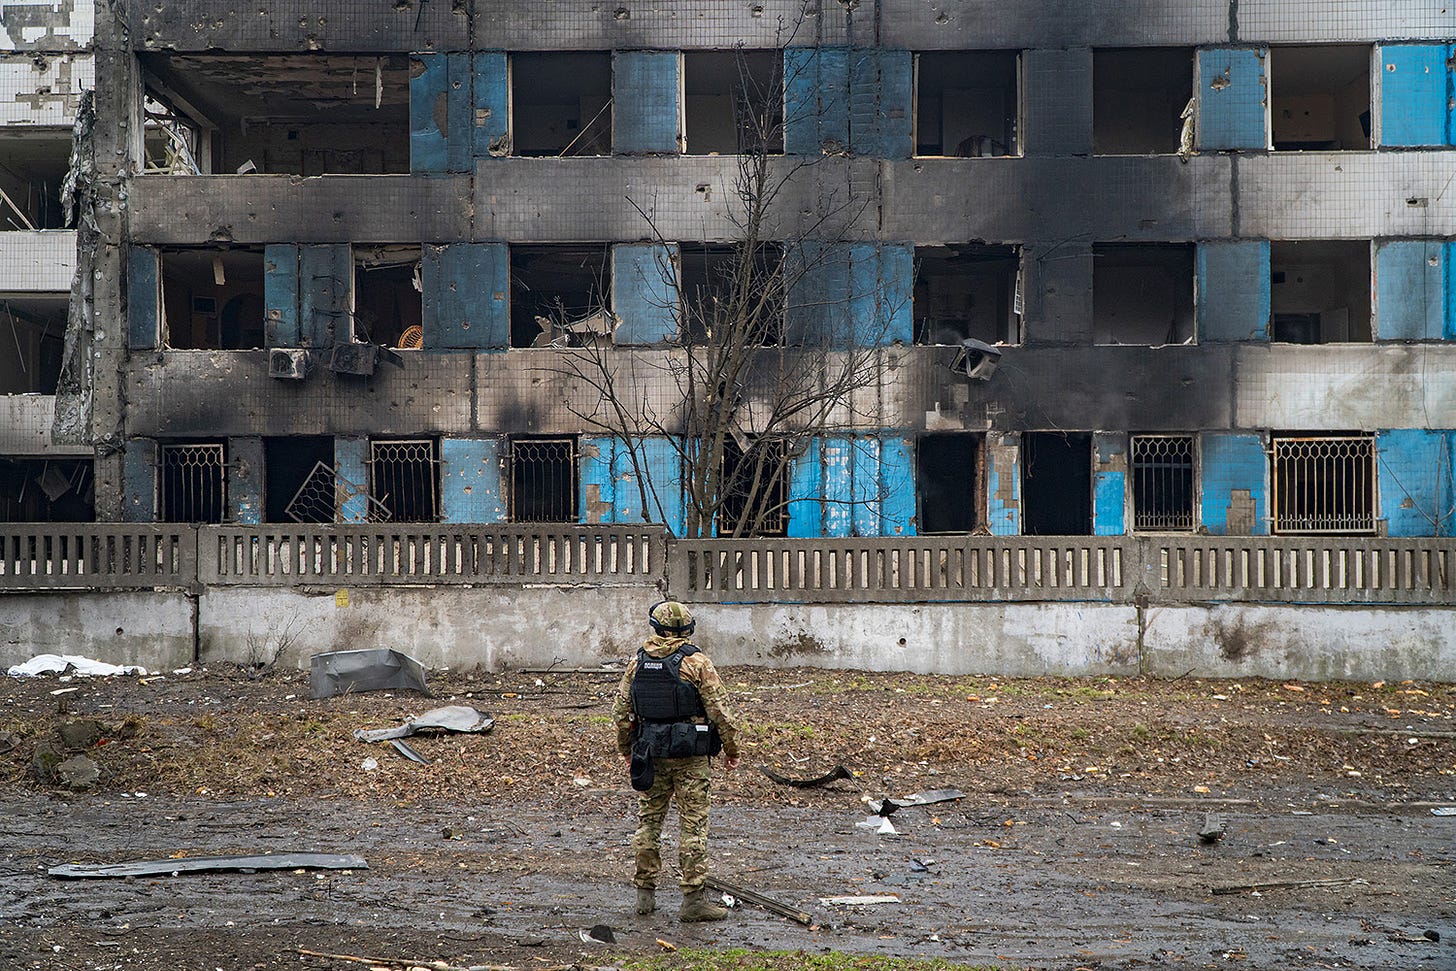 A Ukrainian police officer in full uniform and protective vest and helmet stands in front of a maternity hospital damaged by Russian shelling. The windows are blown out and burned and the debris litters the ground.